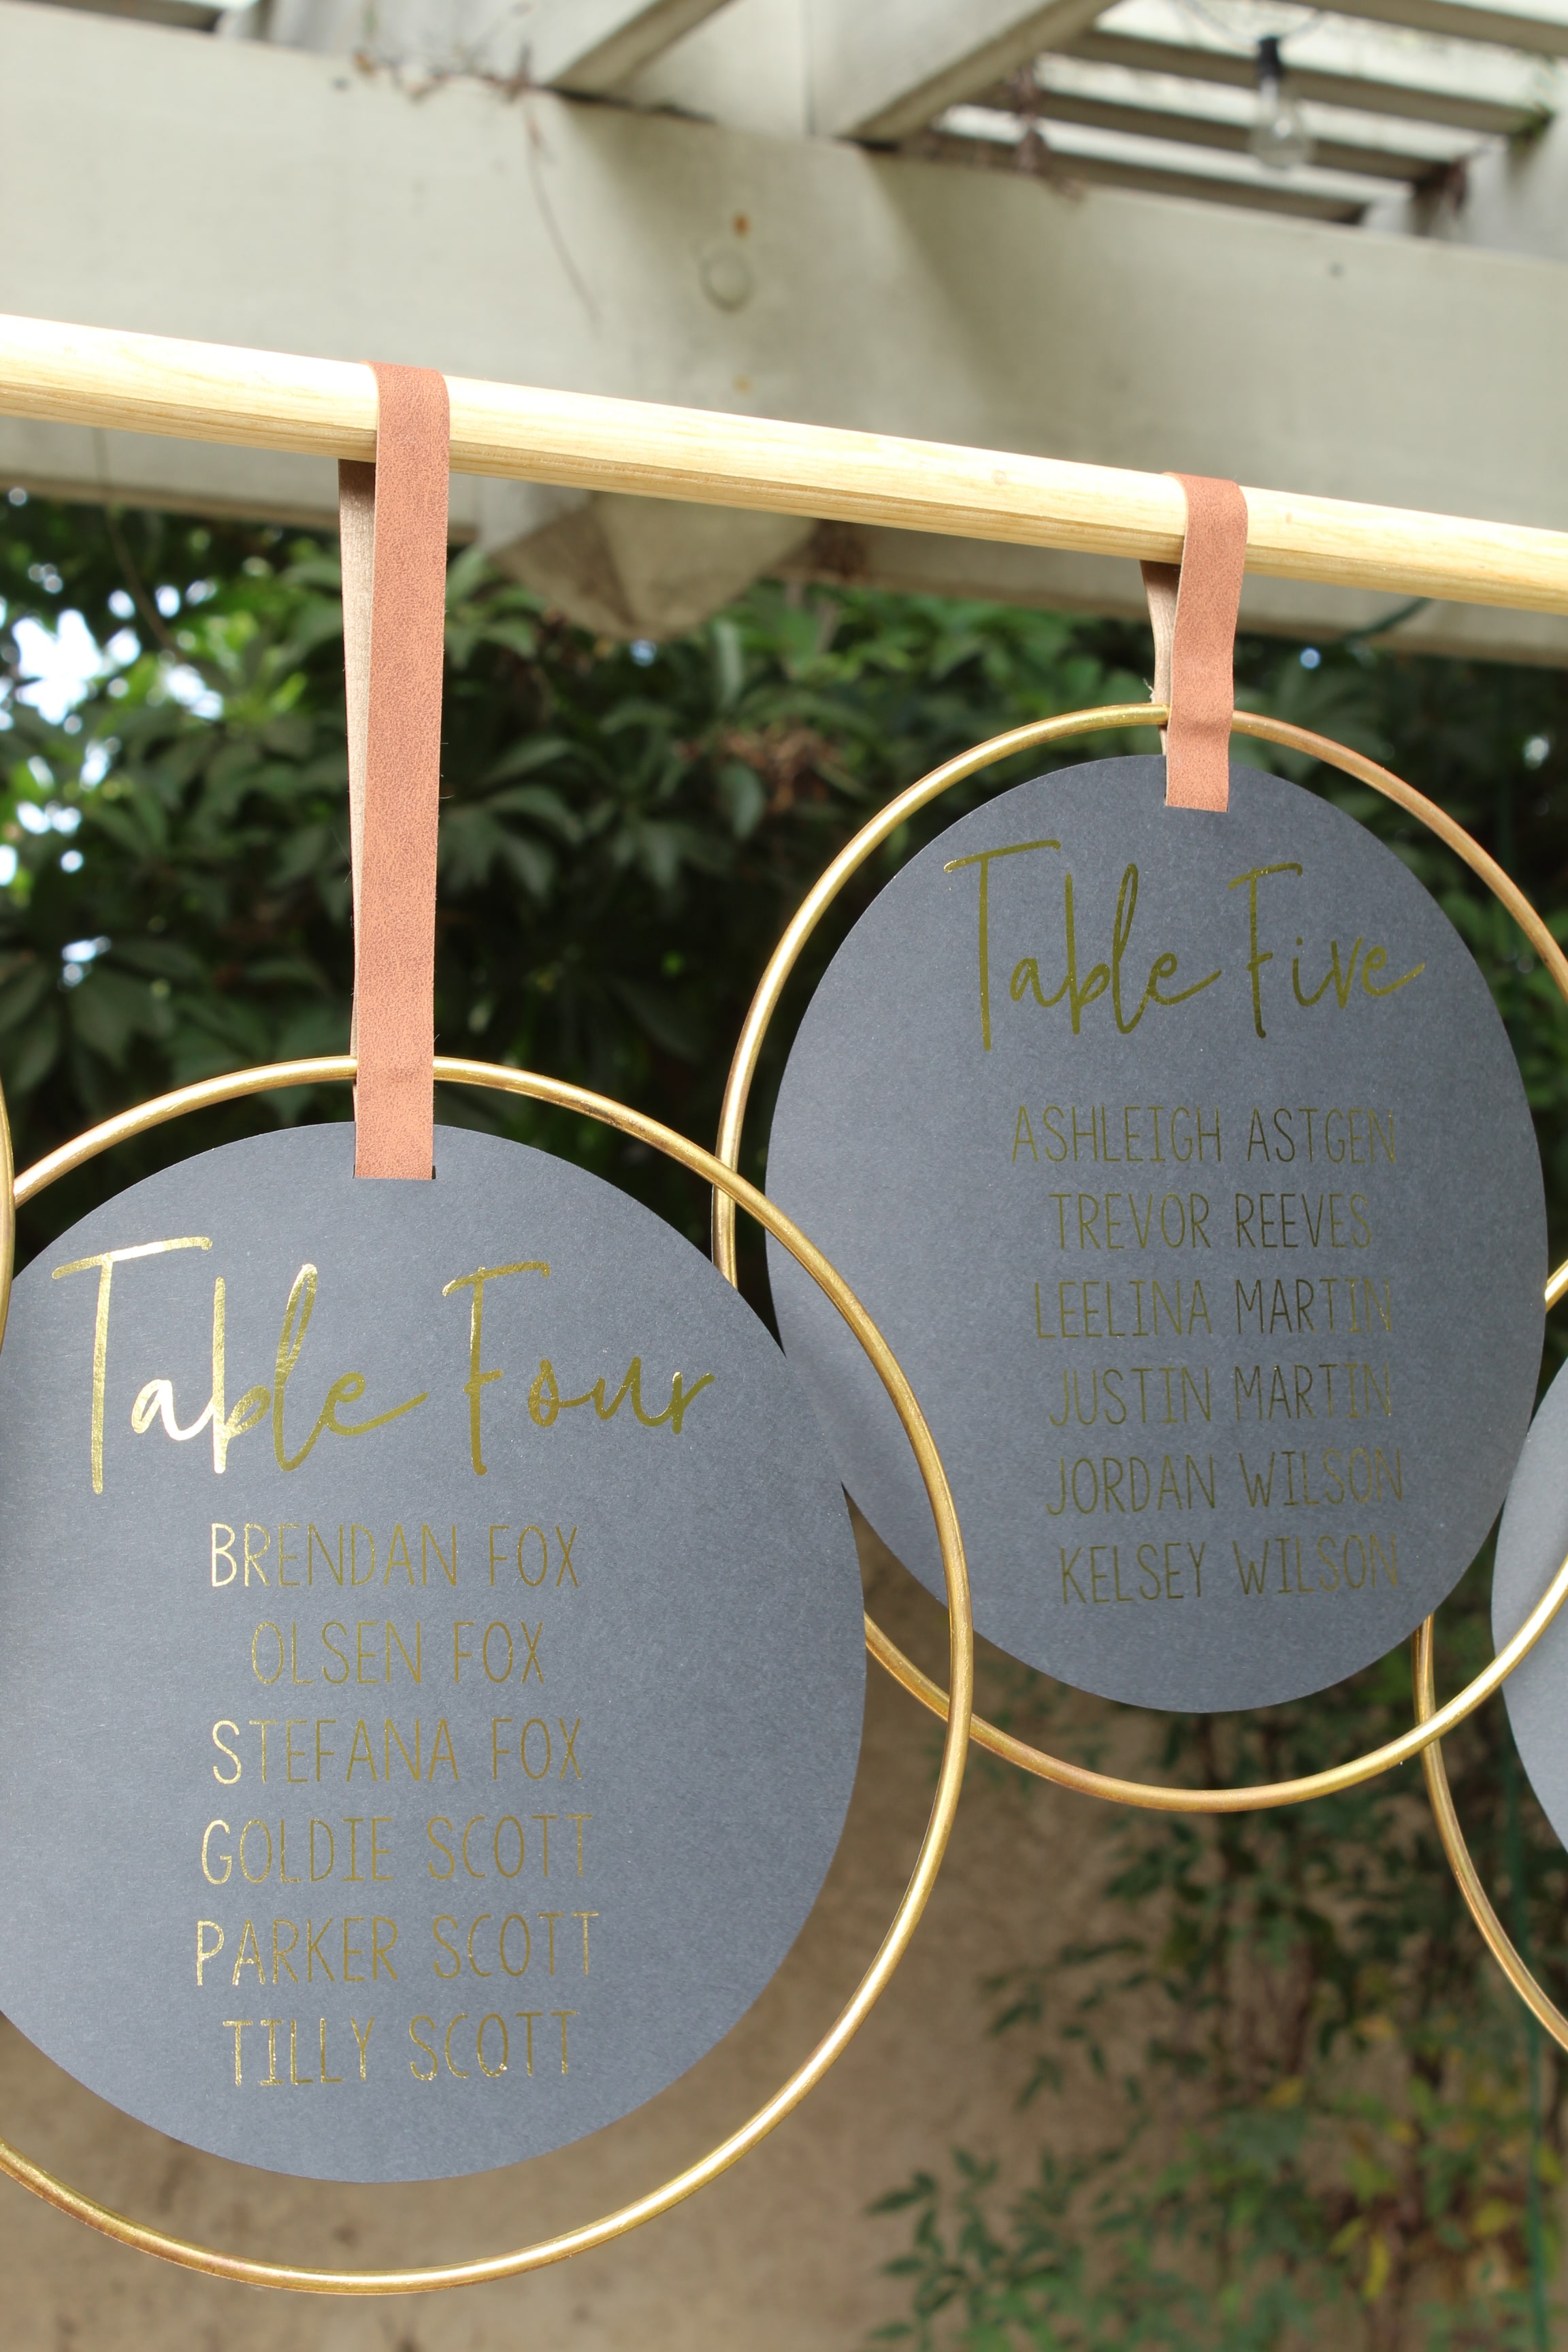 You don't want to miss this DIY Modern Hoop Seating Chart!